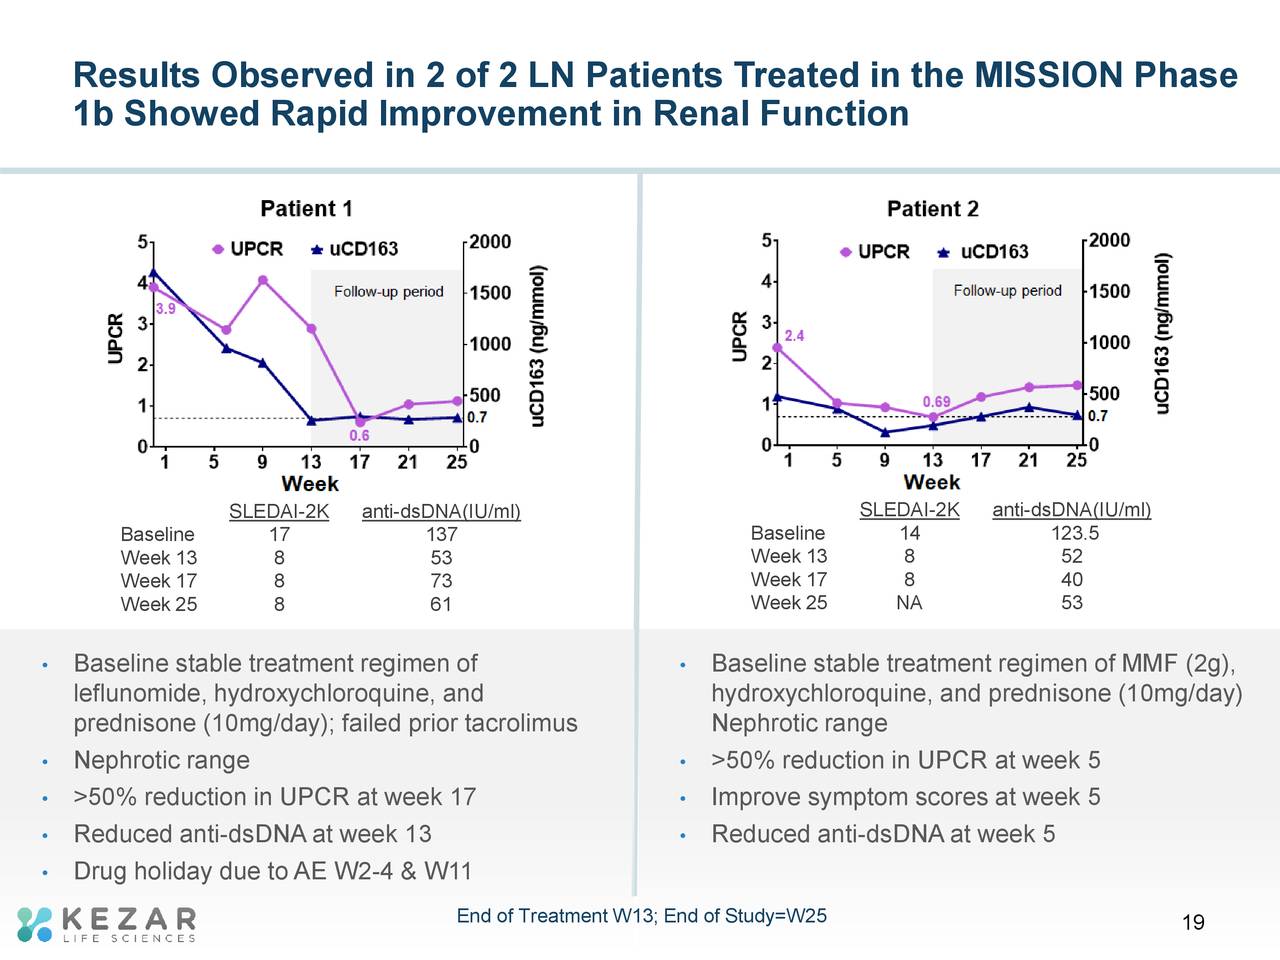 Results Observed in 2 of 2 LN Patients Treated in the MISSION Phase